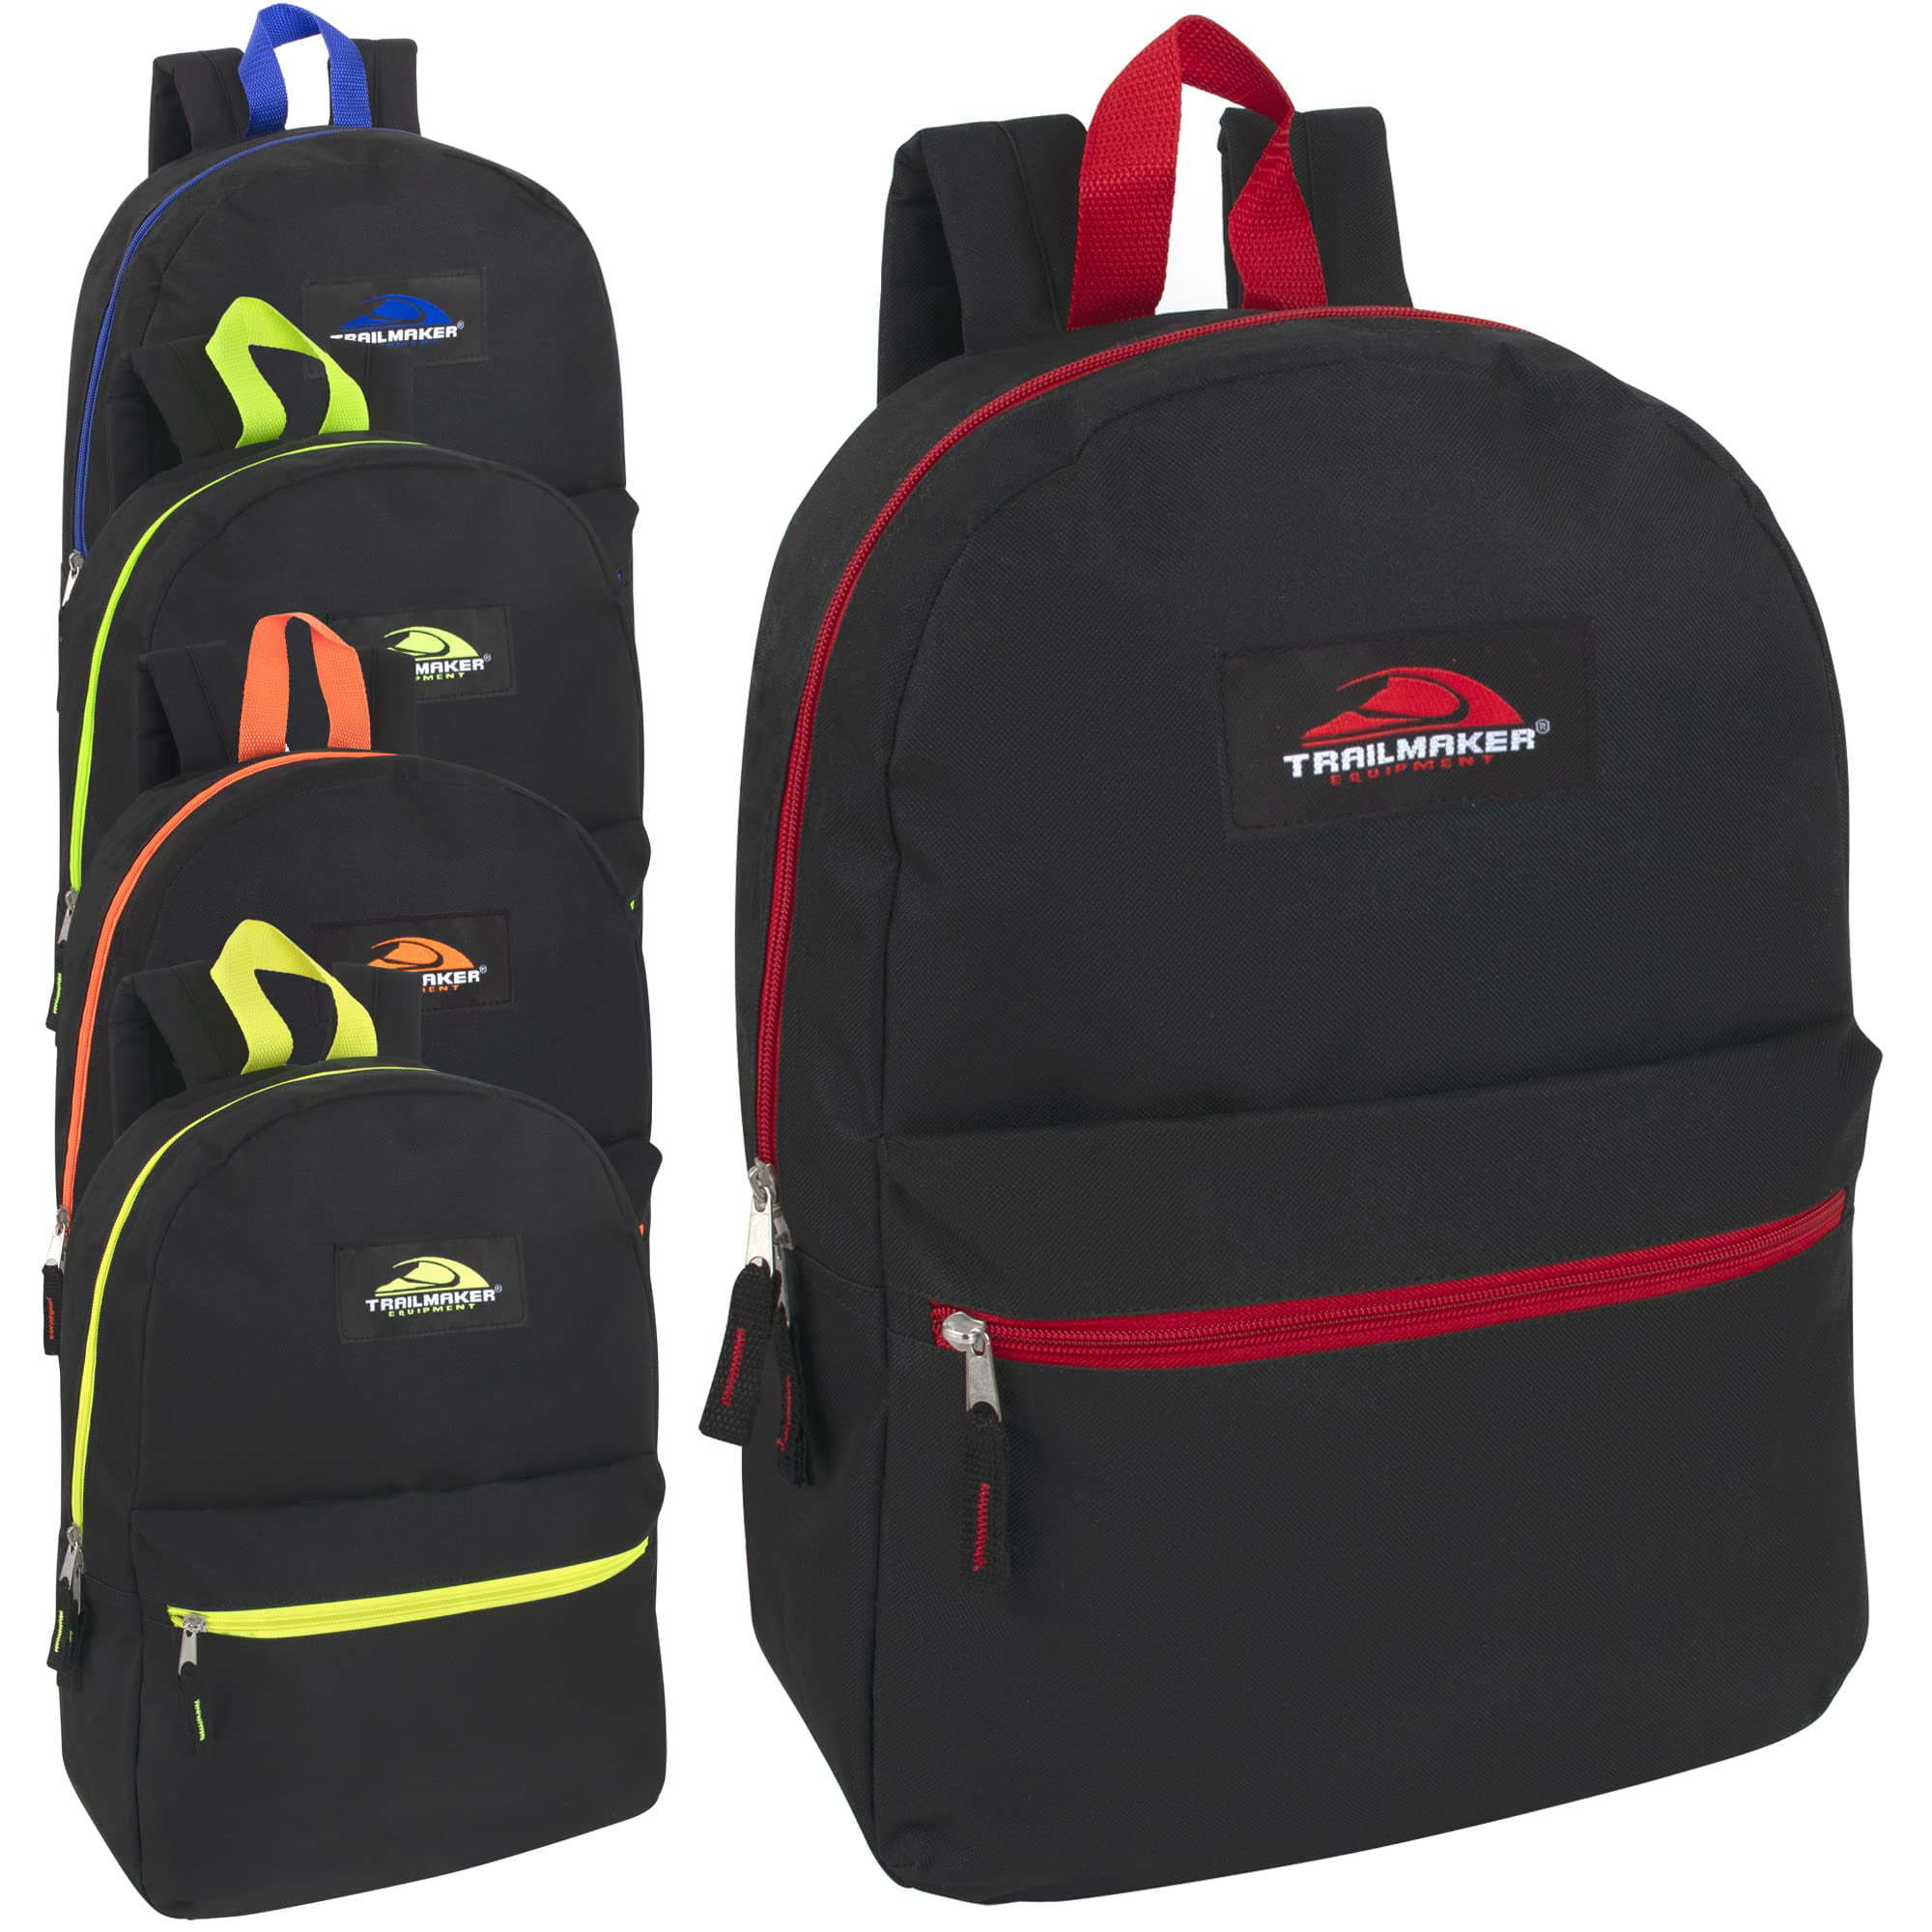 Classic 17 Inch Backpacks in Bulk Wholesale Back Packs for Boys and Girls 24 Pack 